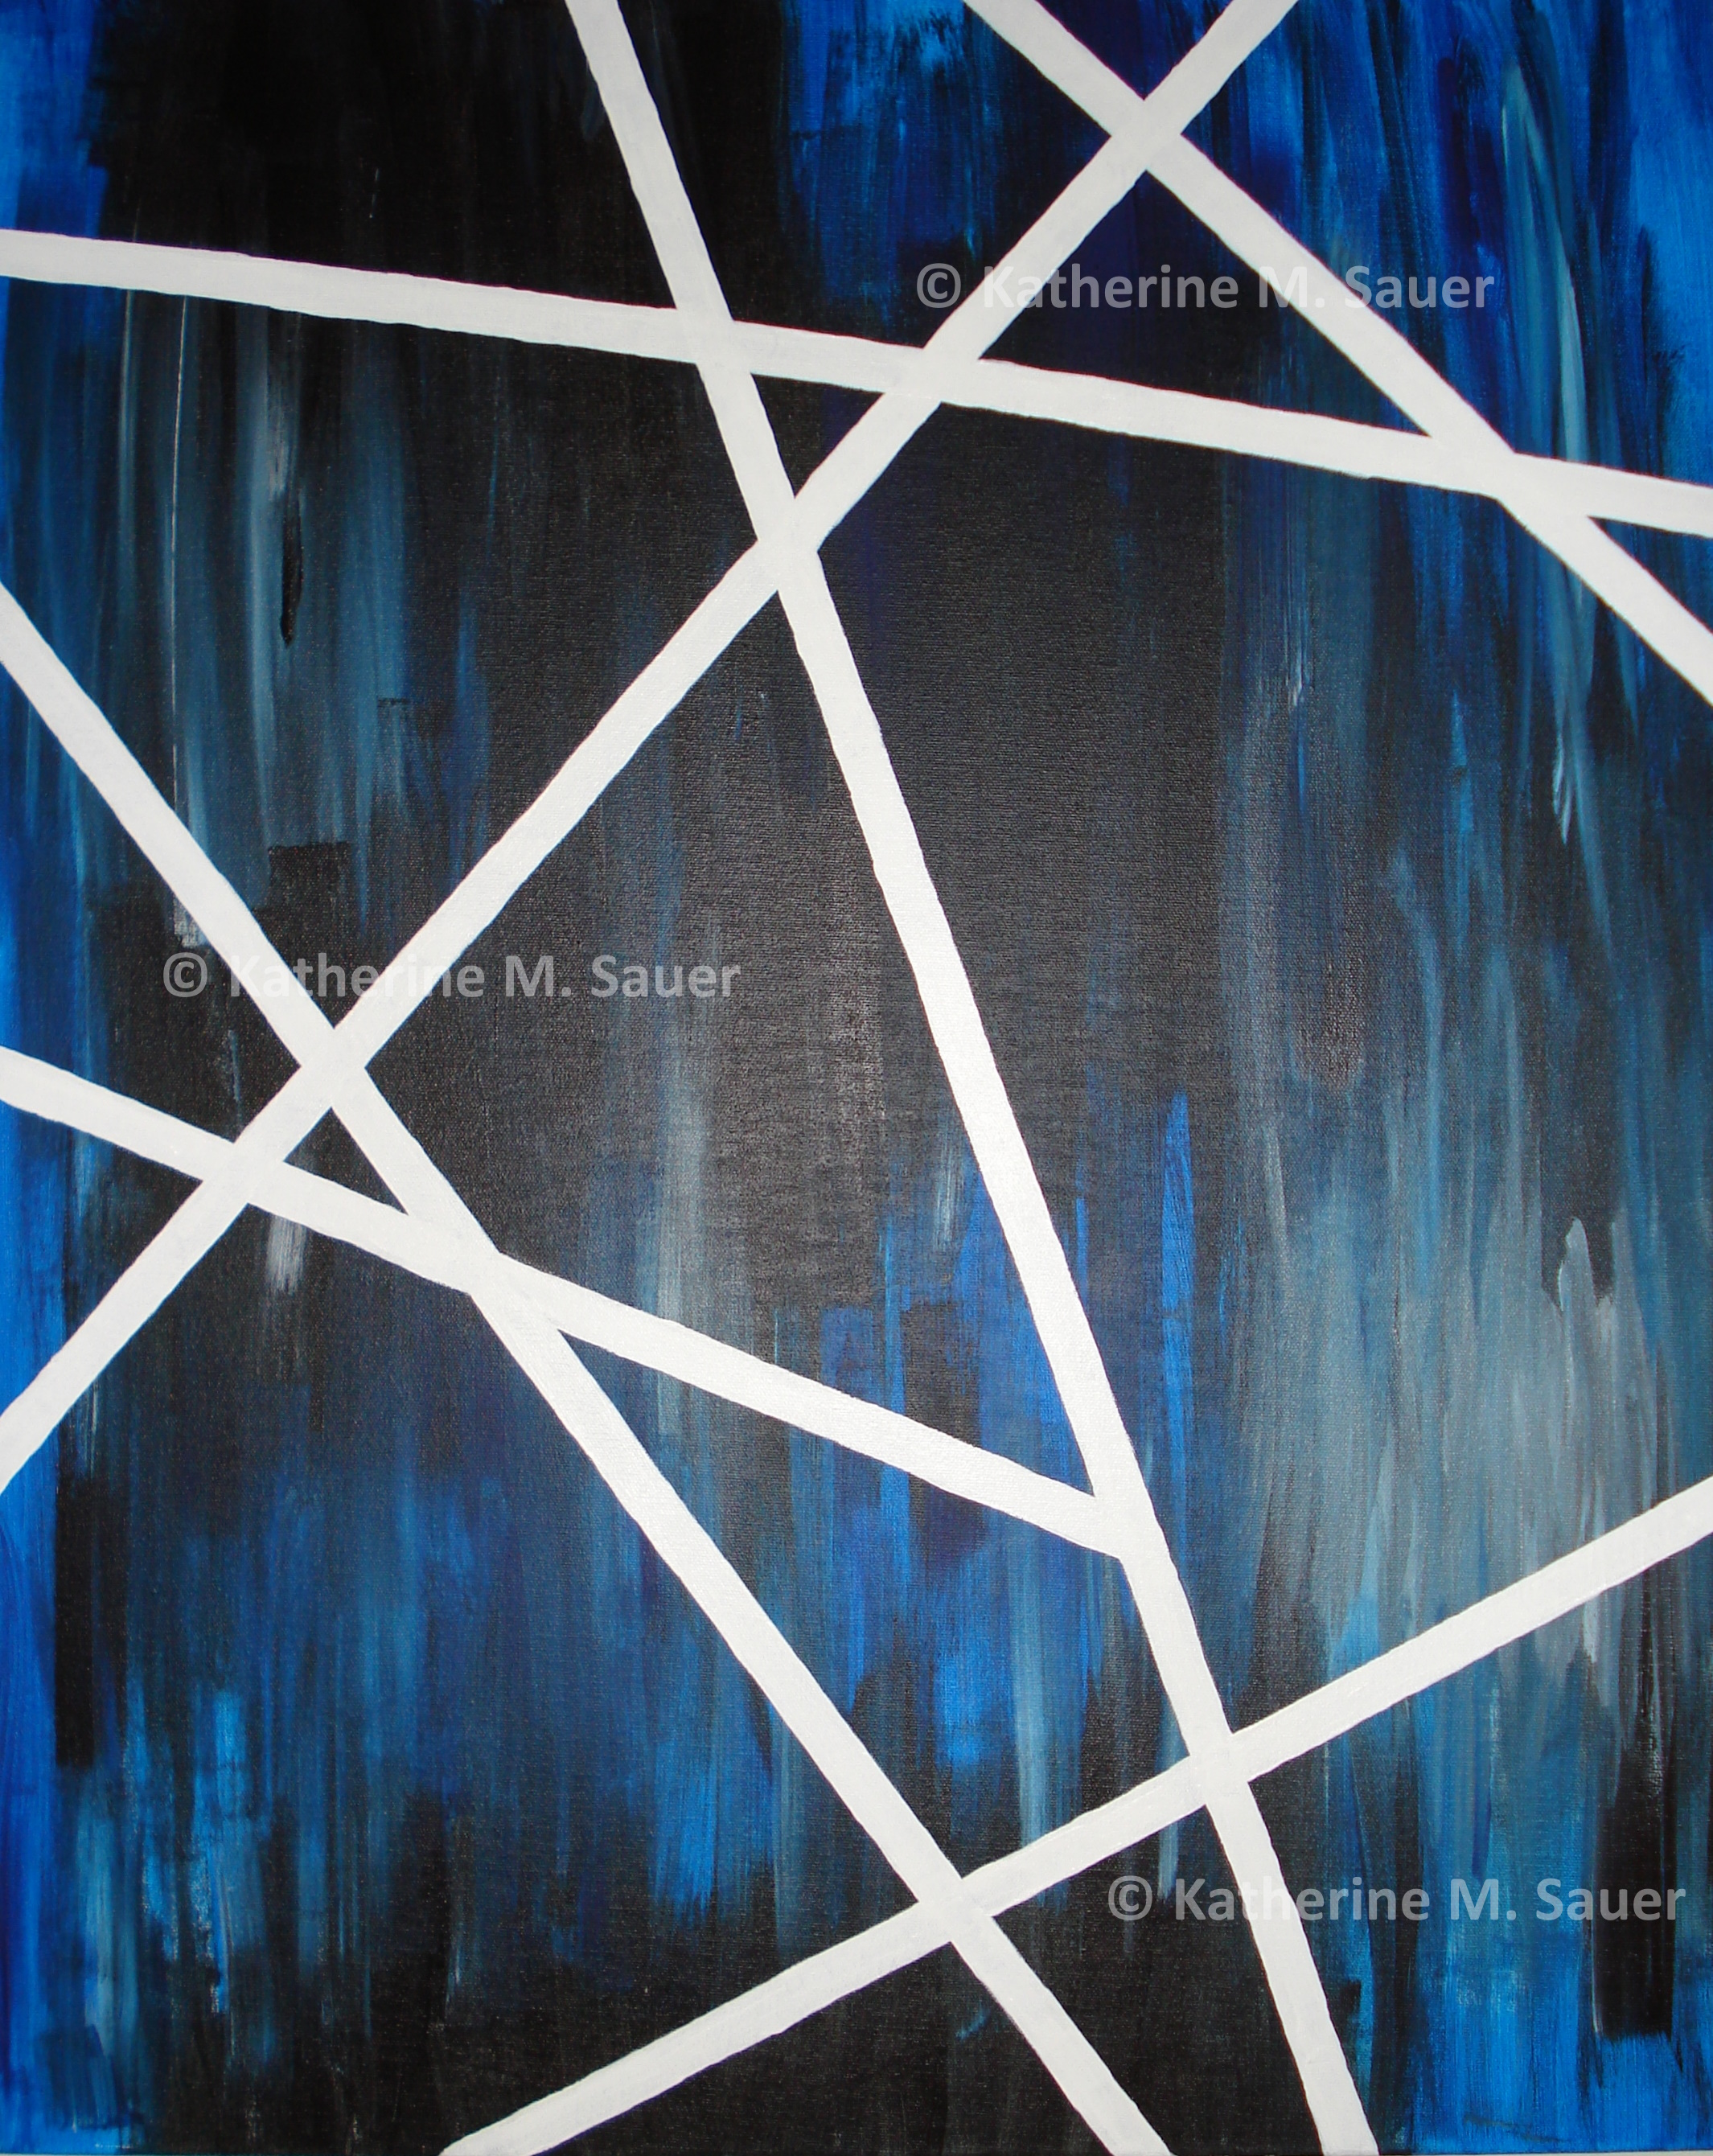 a painting of white lines cris-crossing, over a background of blue, black, and gray